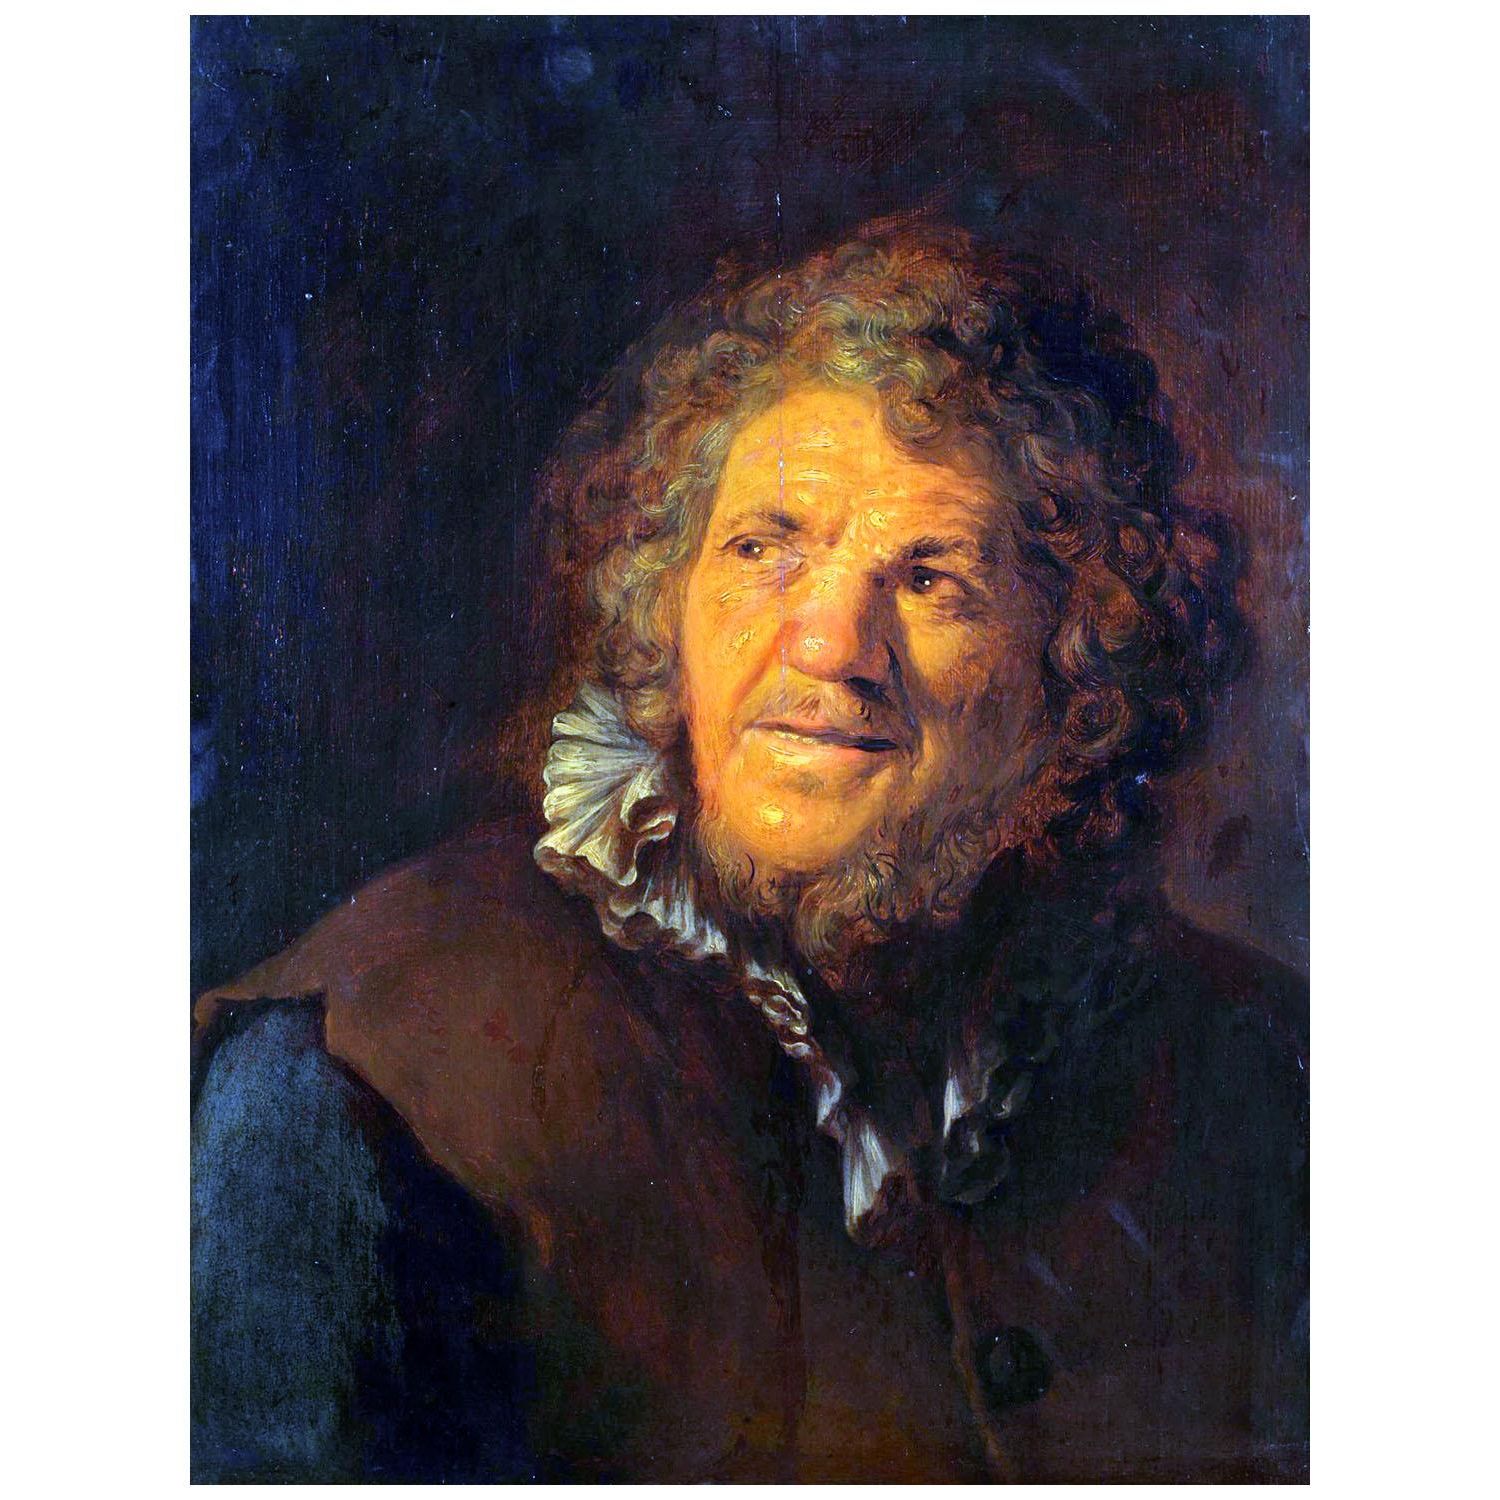 Jan Lievens. The Smiling Old Man. 1635. Hermitage Museum